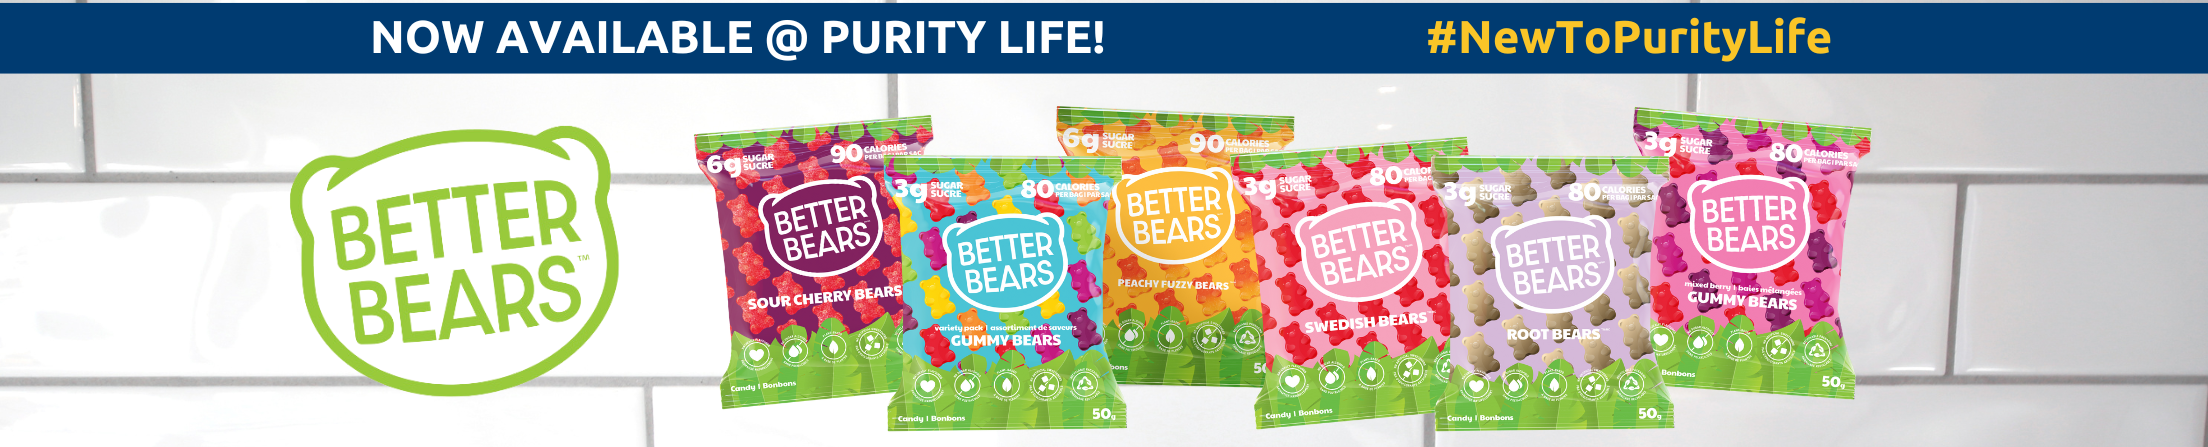 Better Bears New to Purity Life!